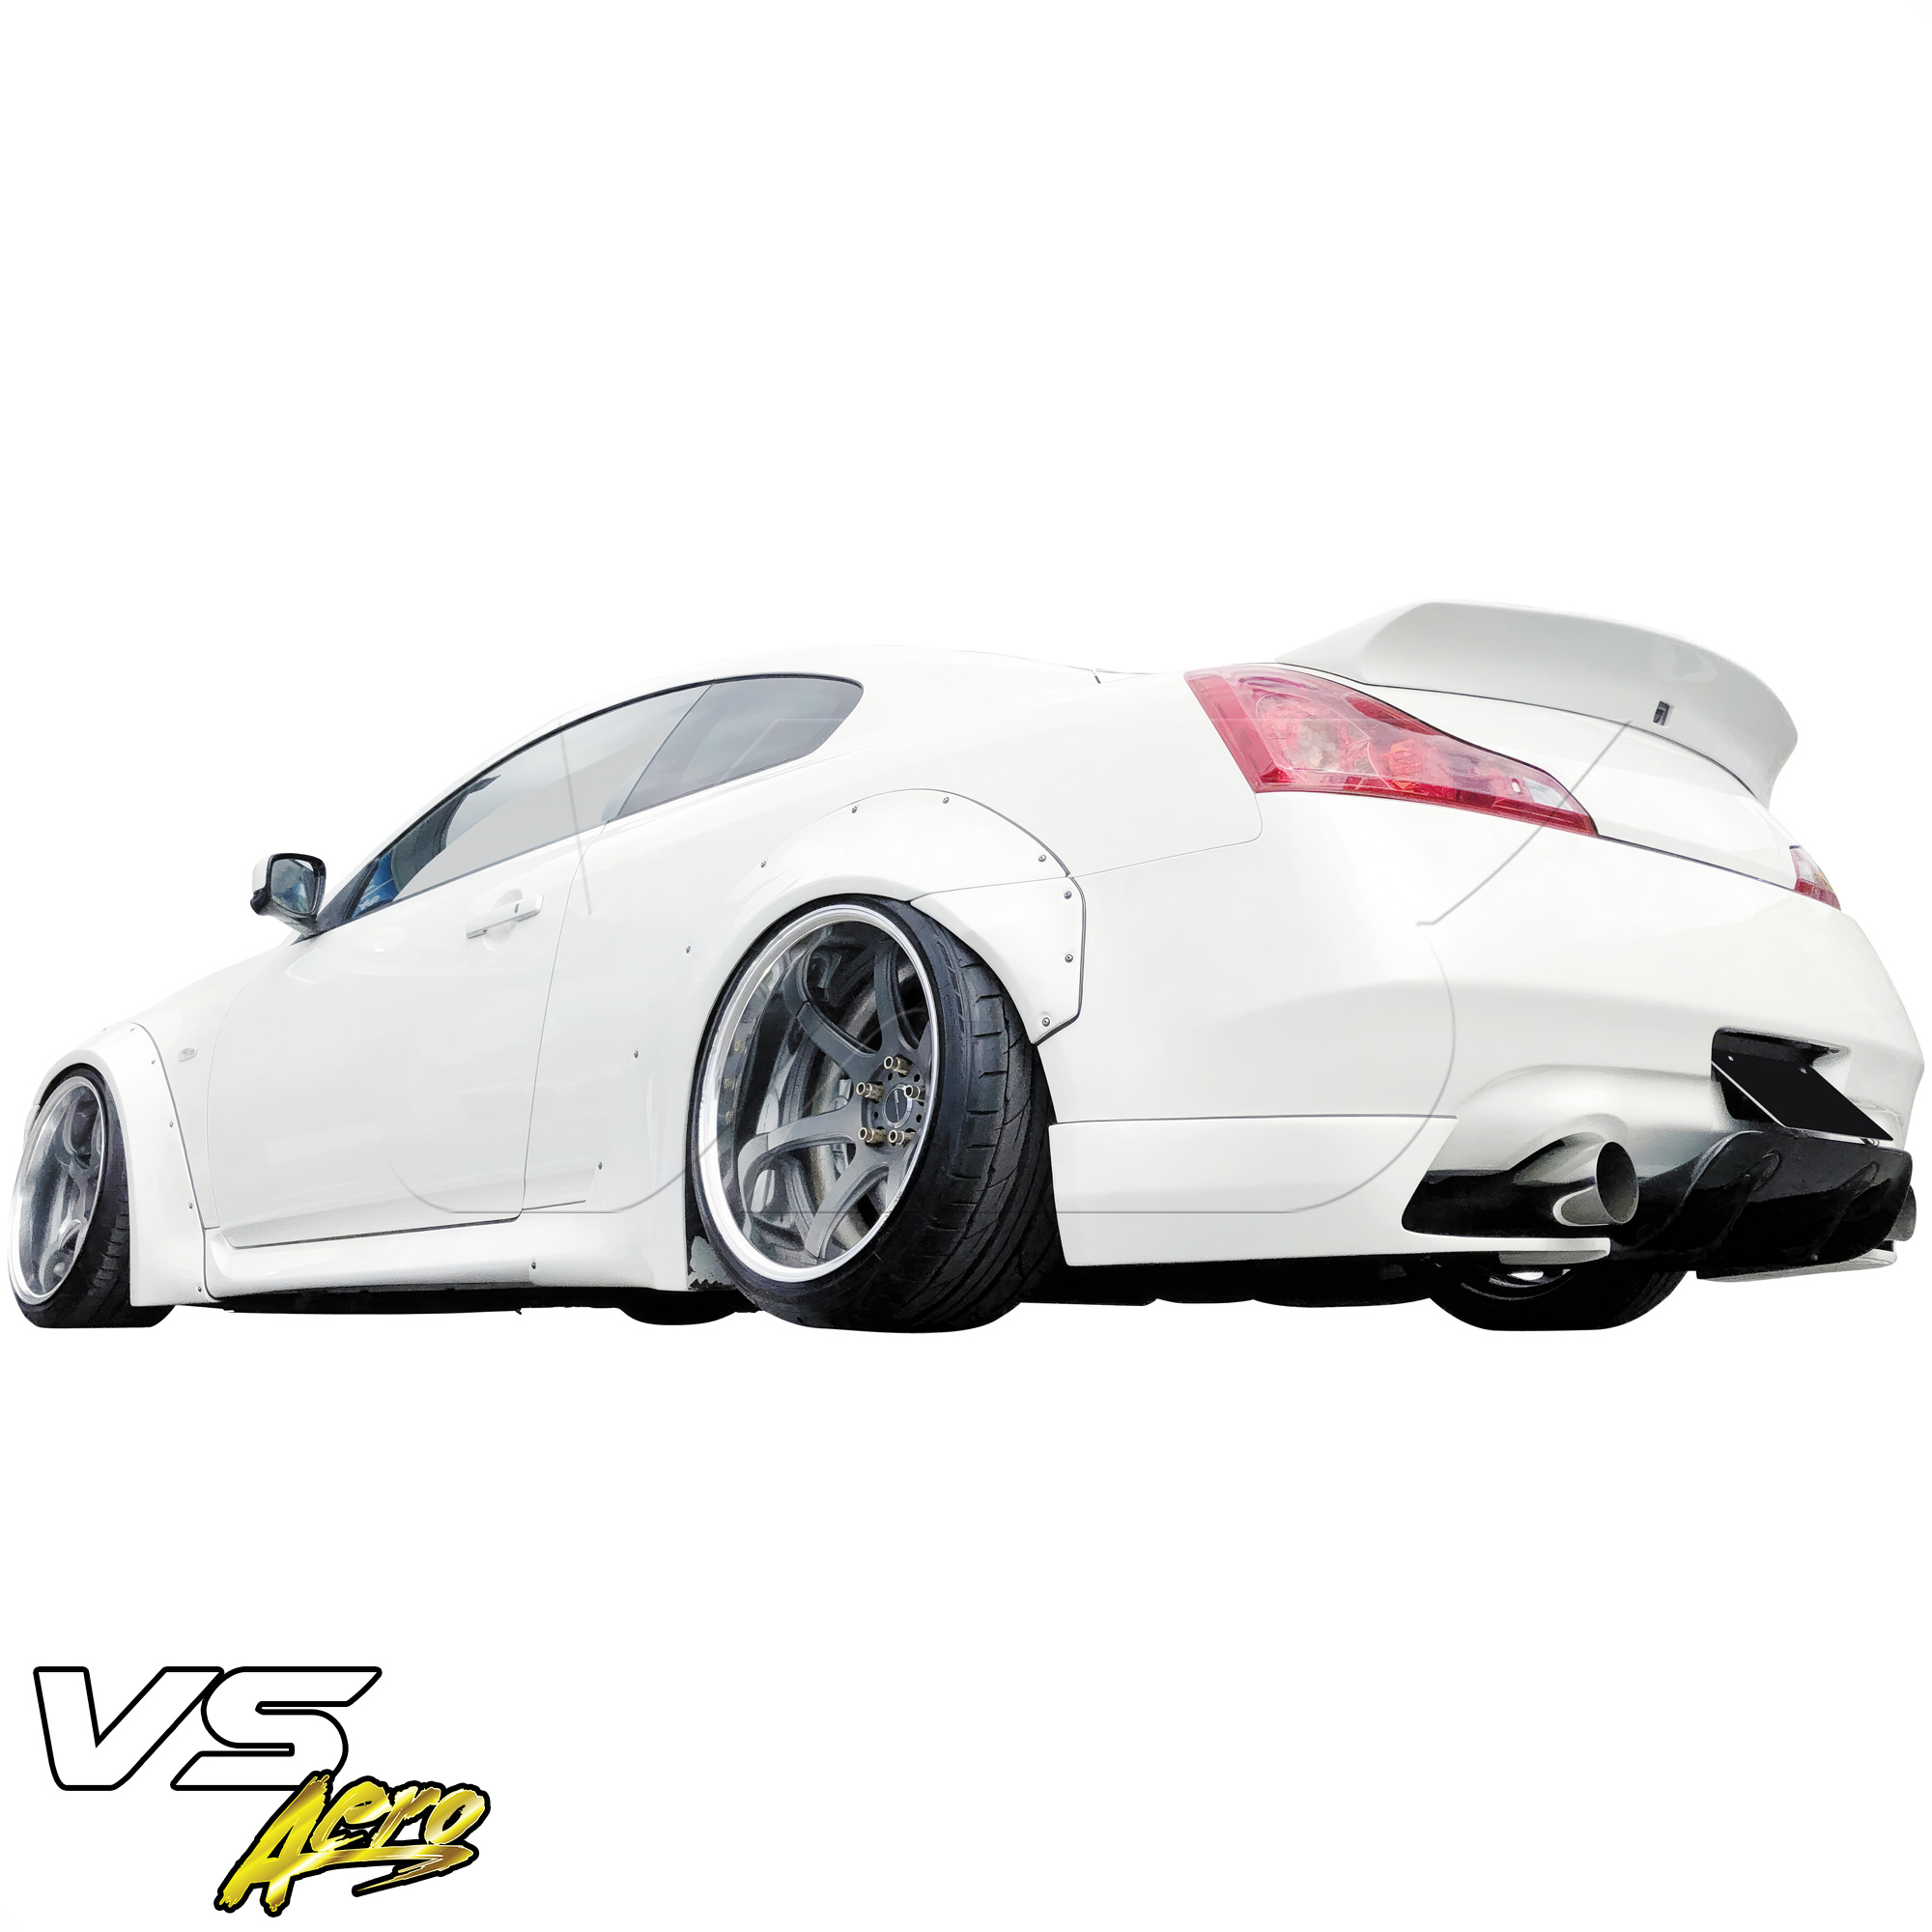 VSaero FRP LBPE Wide Body Fender Flares (rear) 4pc > Infiniti G37 Coupe 2008-2015 > 2dr Coupe - Image 31